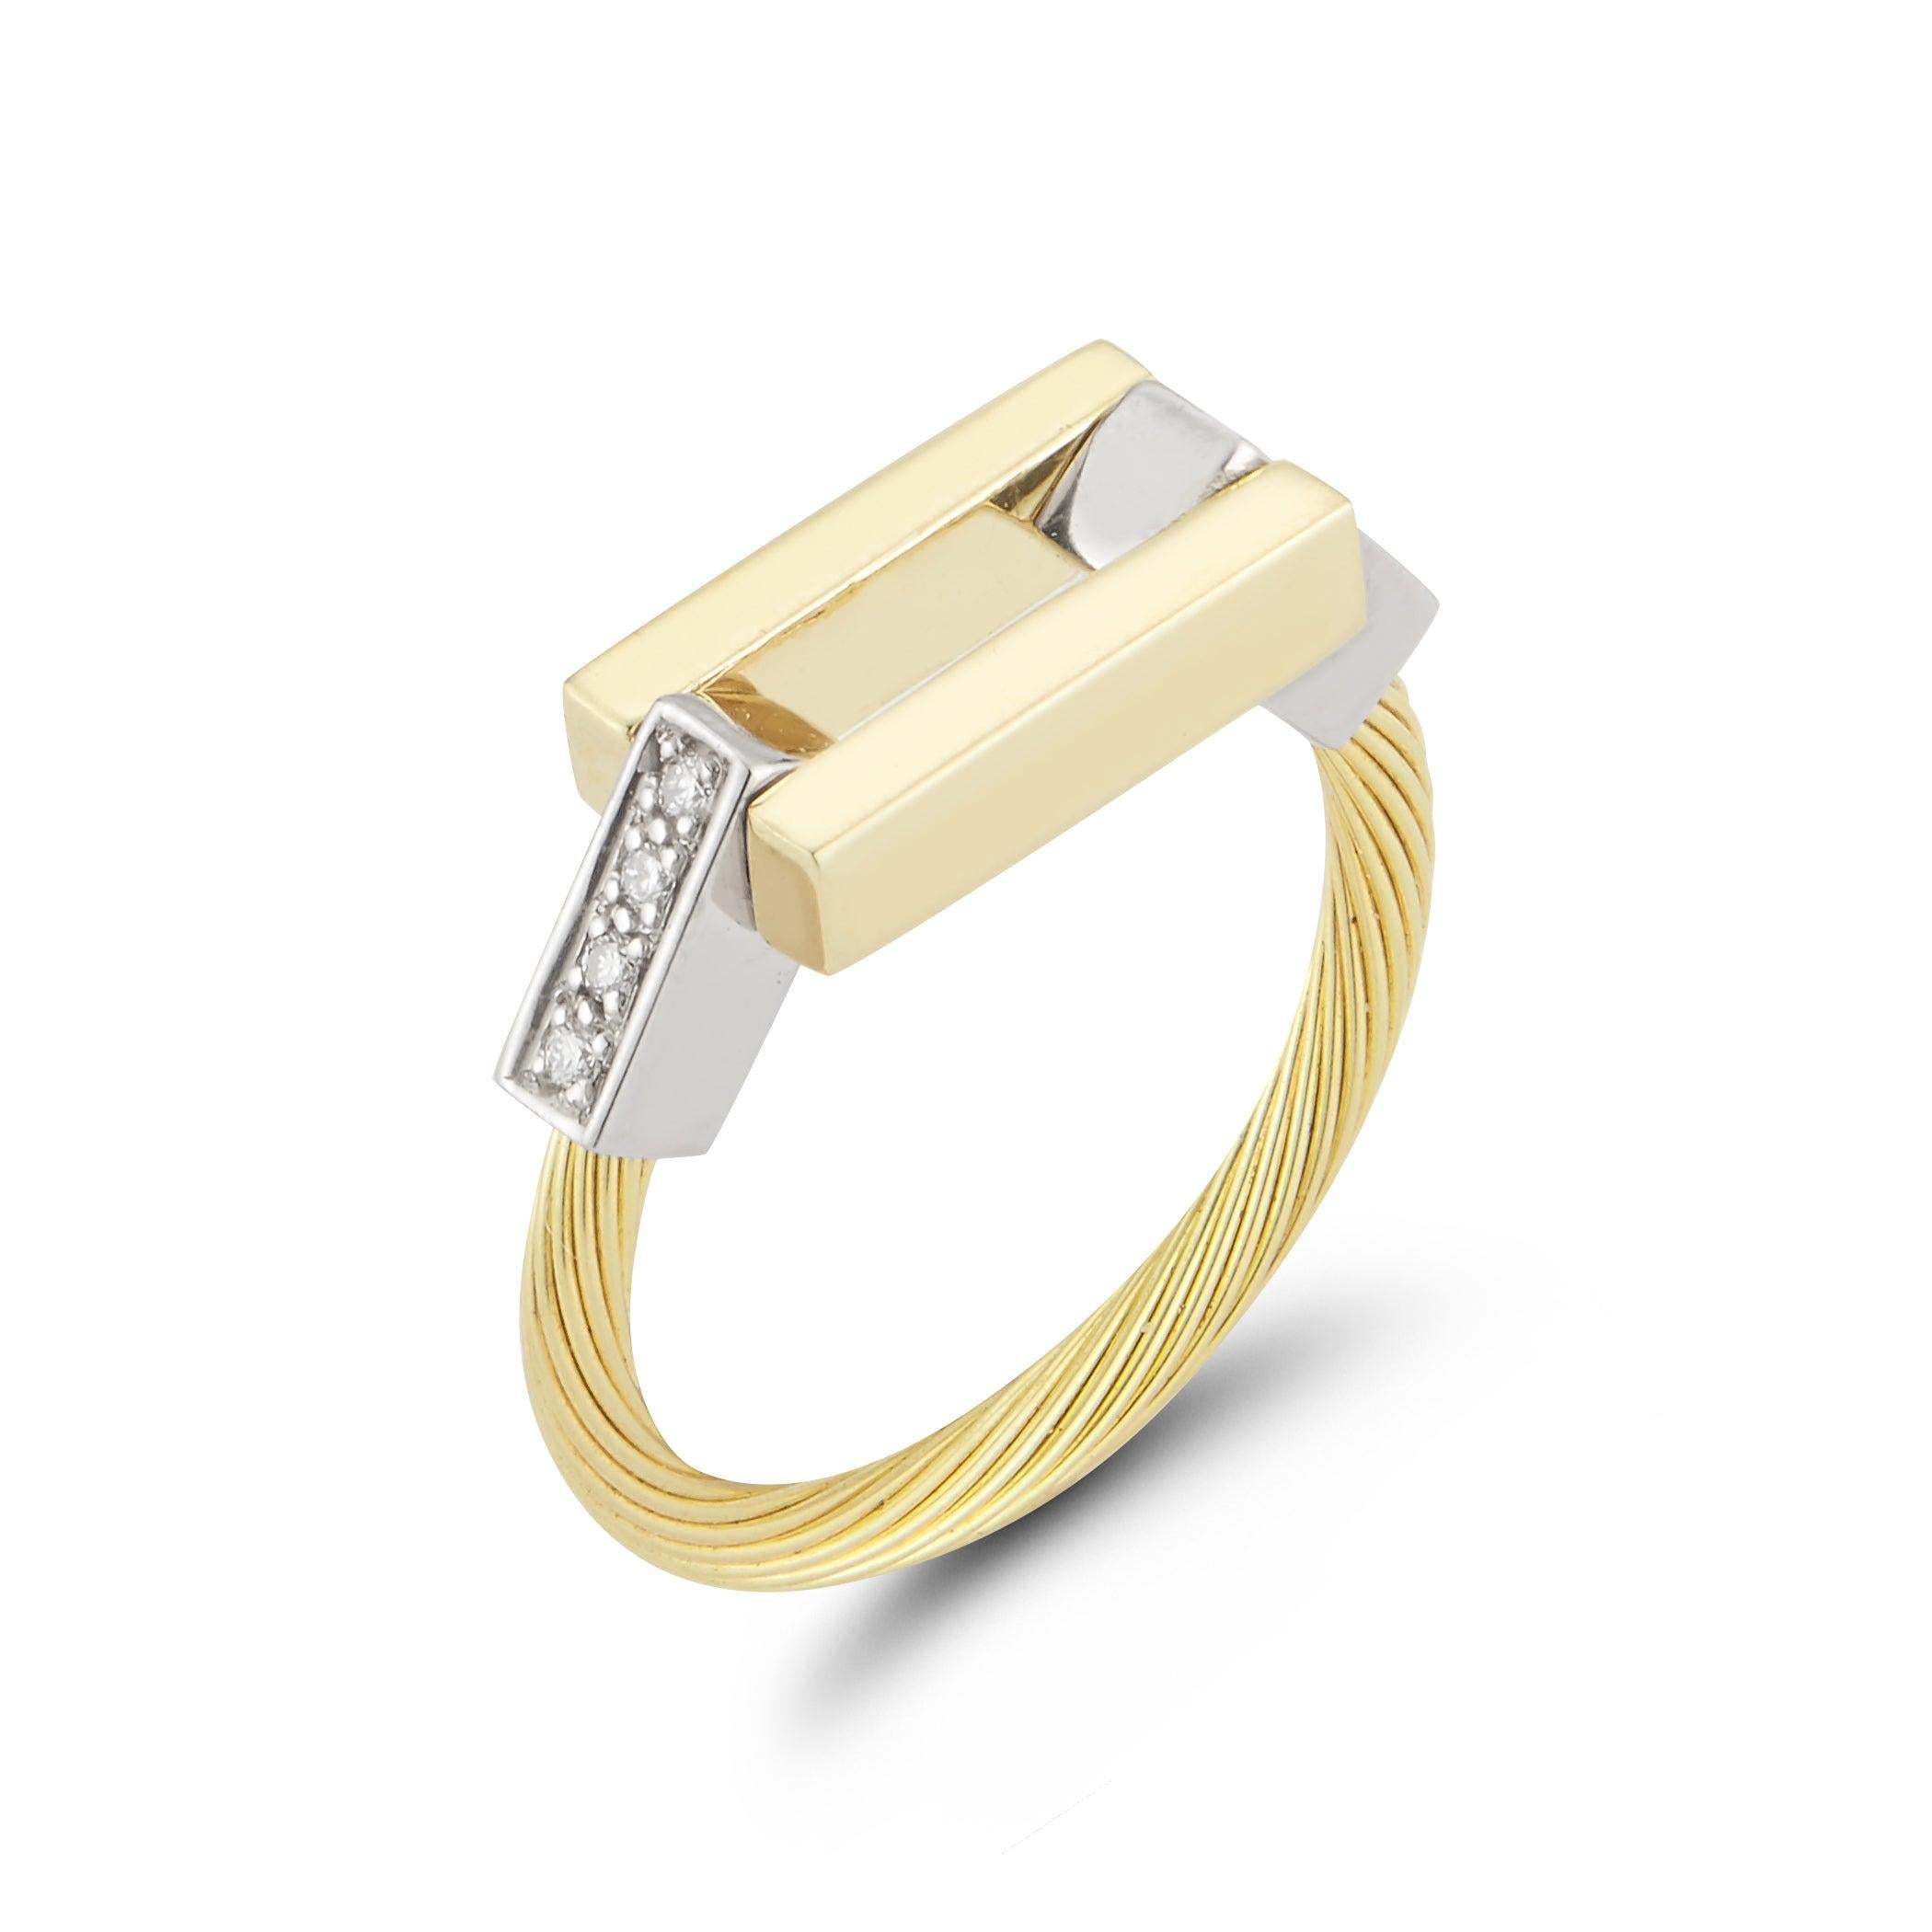 For Sale:  Handcrafted 14 Karat Yellow Gold Open Rectangle Wire Ring 3